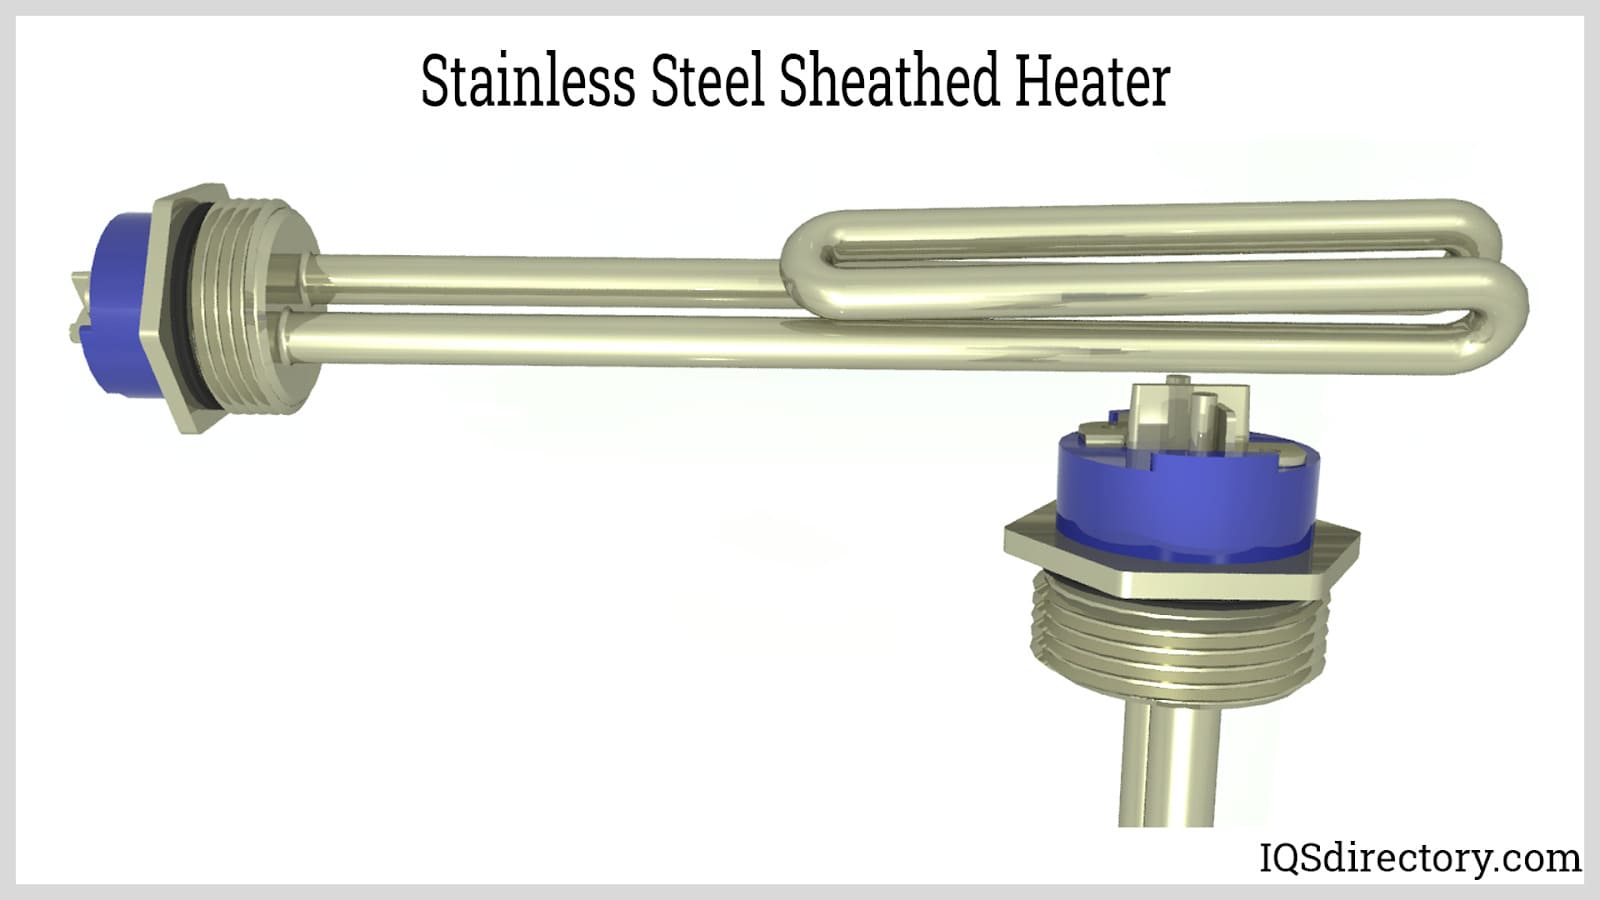 Stainless Steel Sheathed Heater